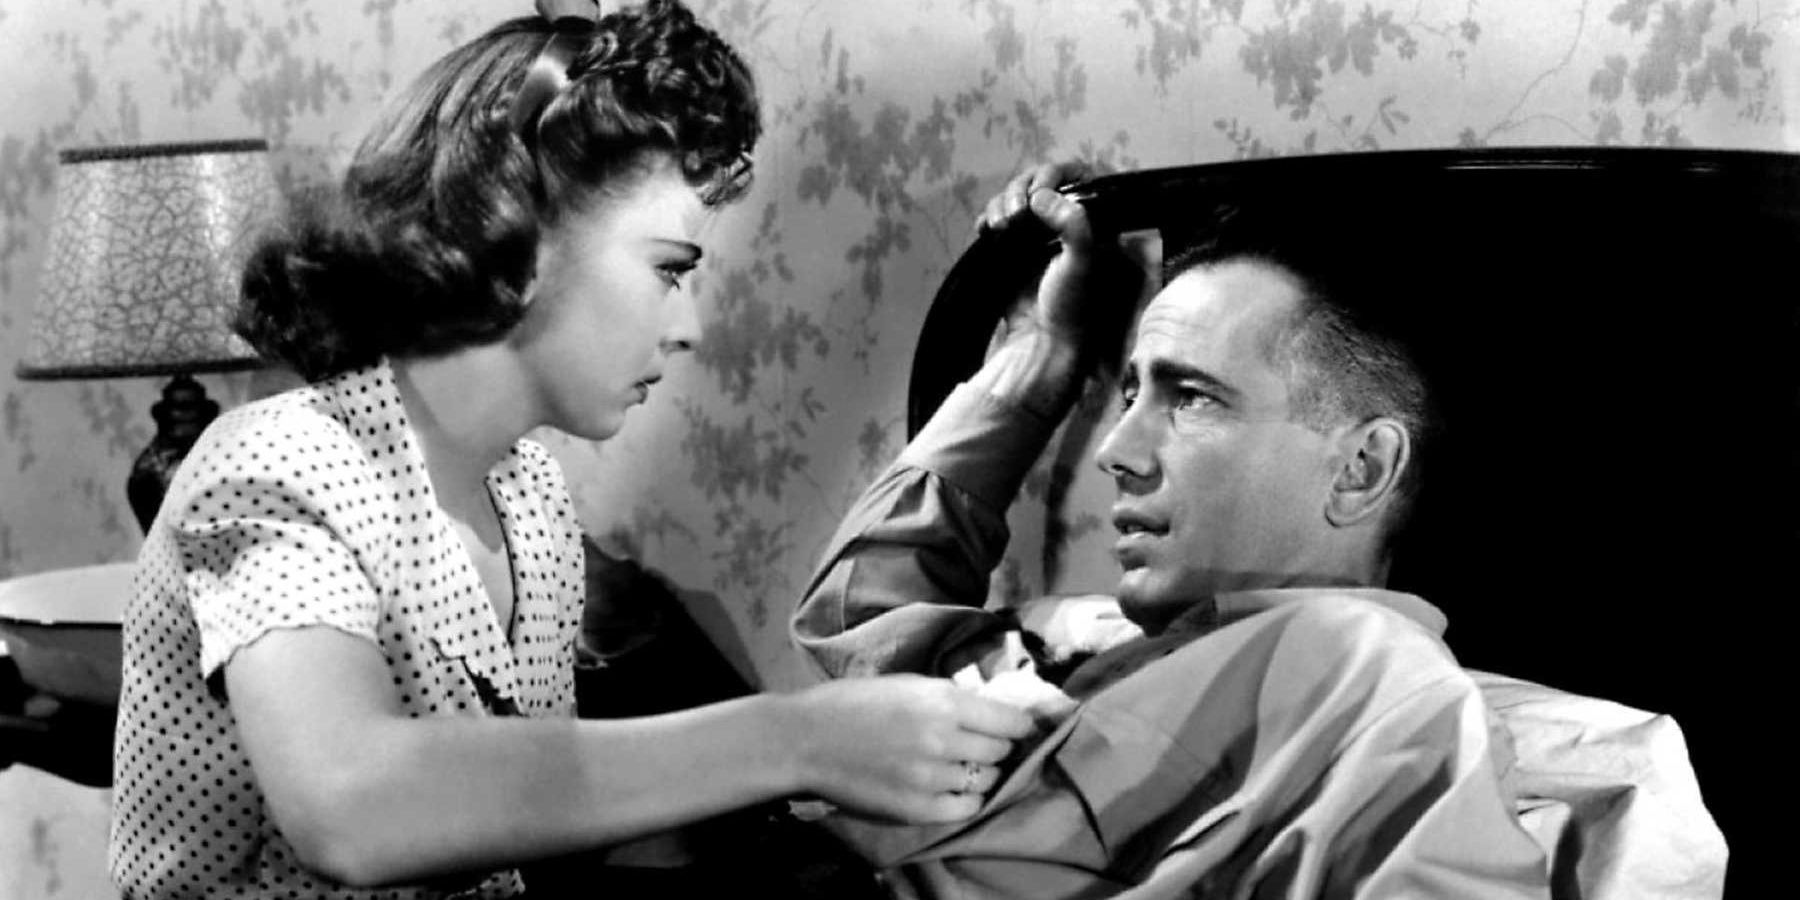 Humphrey Bogart in a bed being tended to by Ida Lupino in High Sierra.